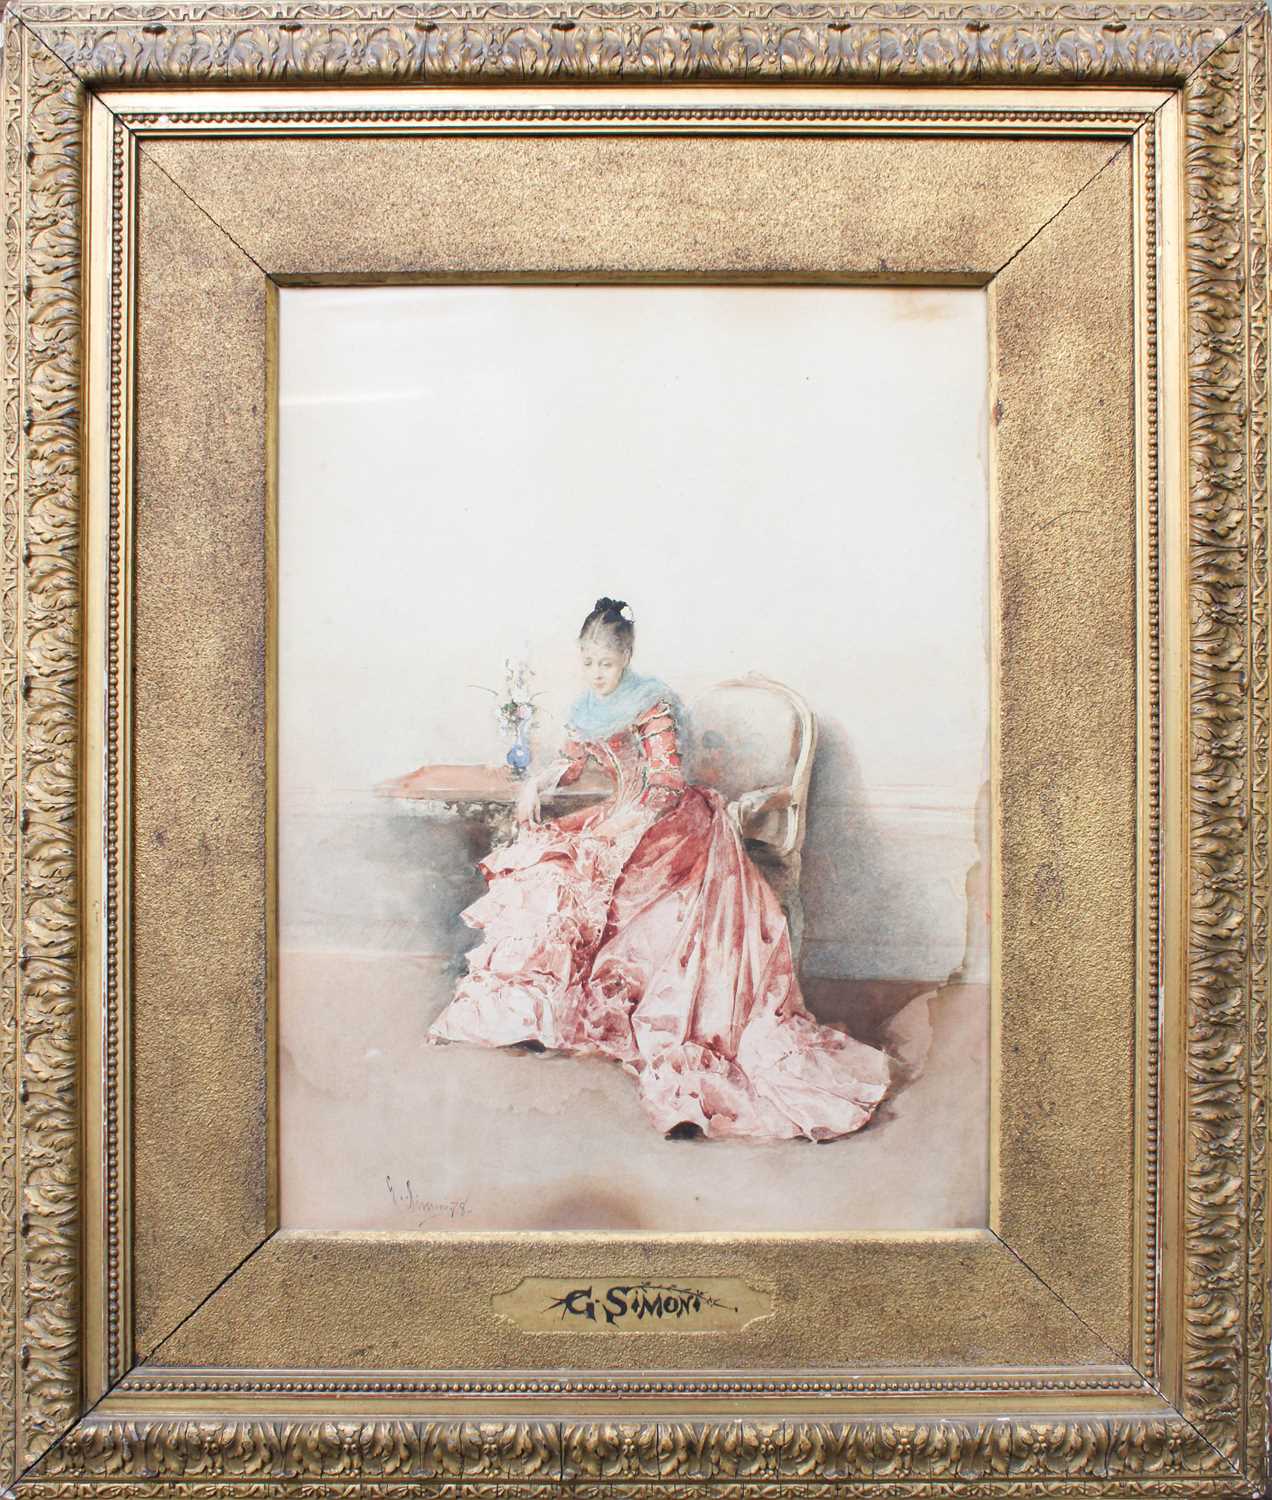 Gustavo Simoni (1845-1926) ItalianPortrait of an elegant lady, seated, in an interiorSigned and - Image 2 of 2